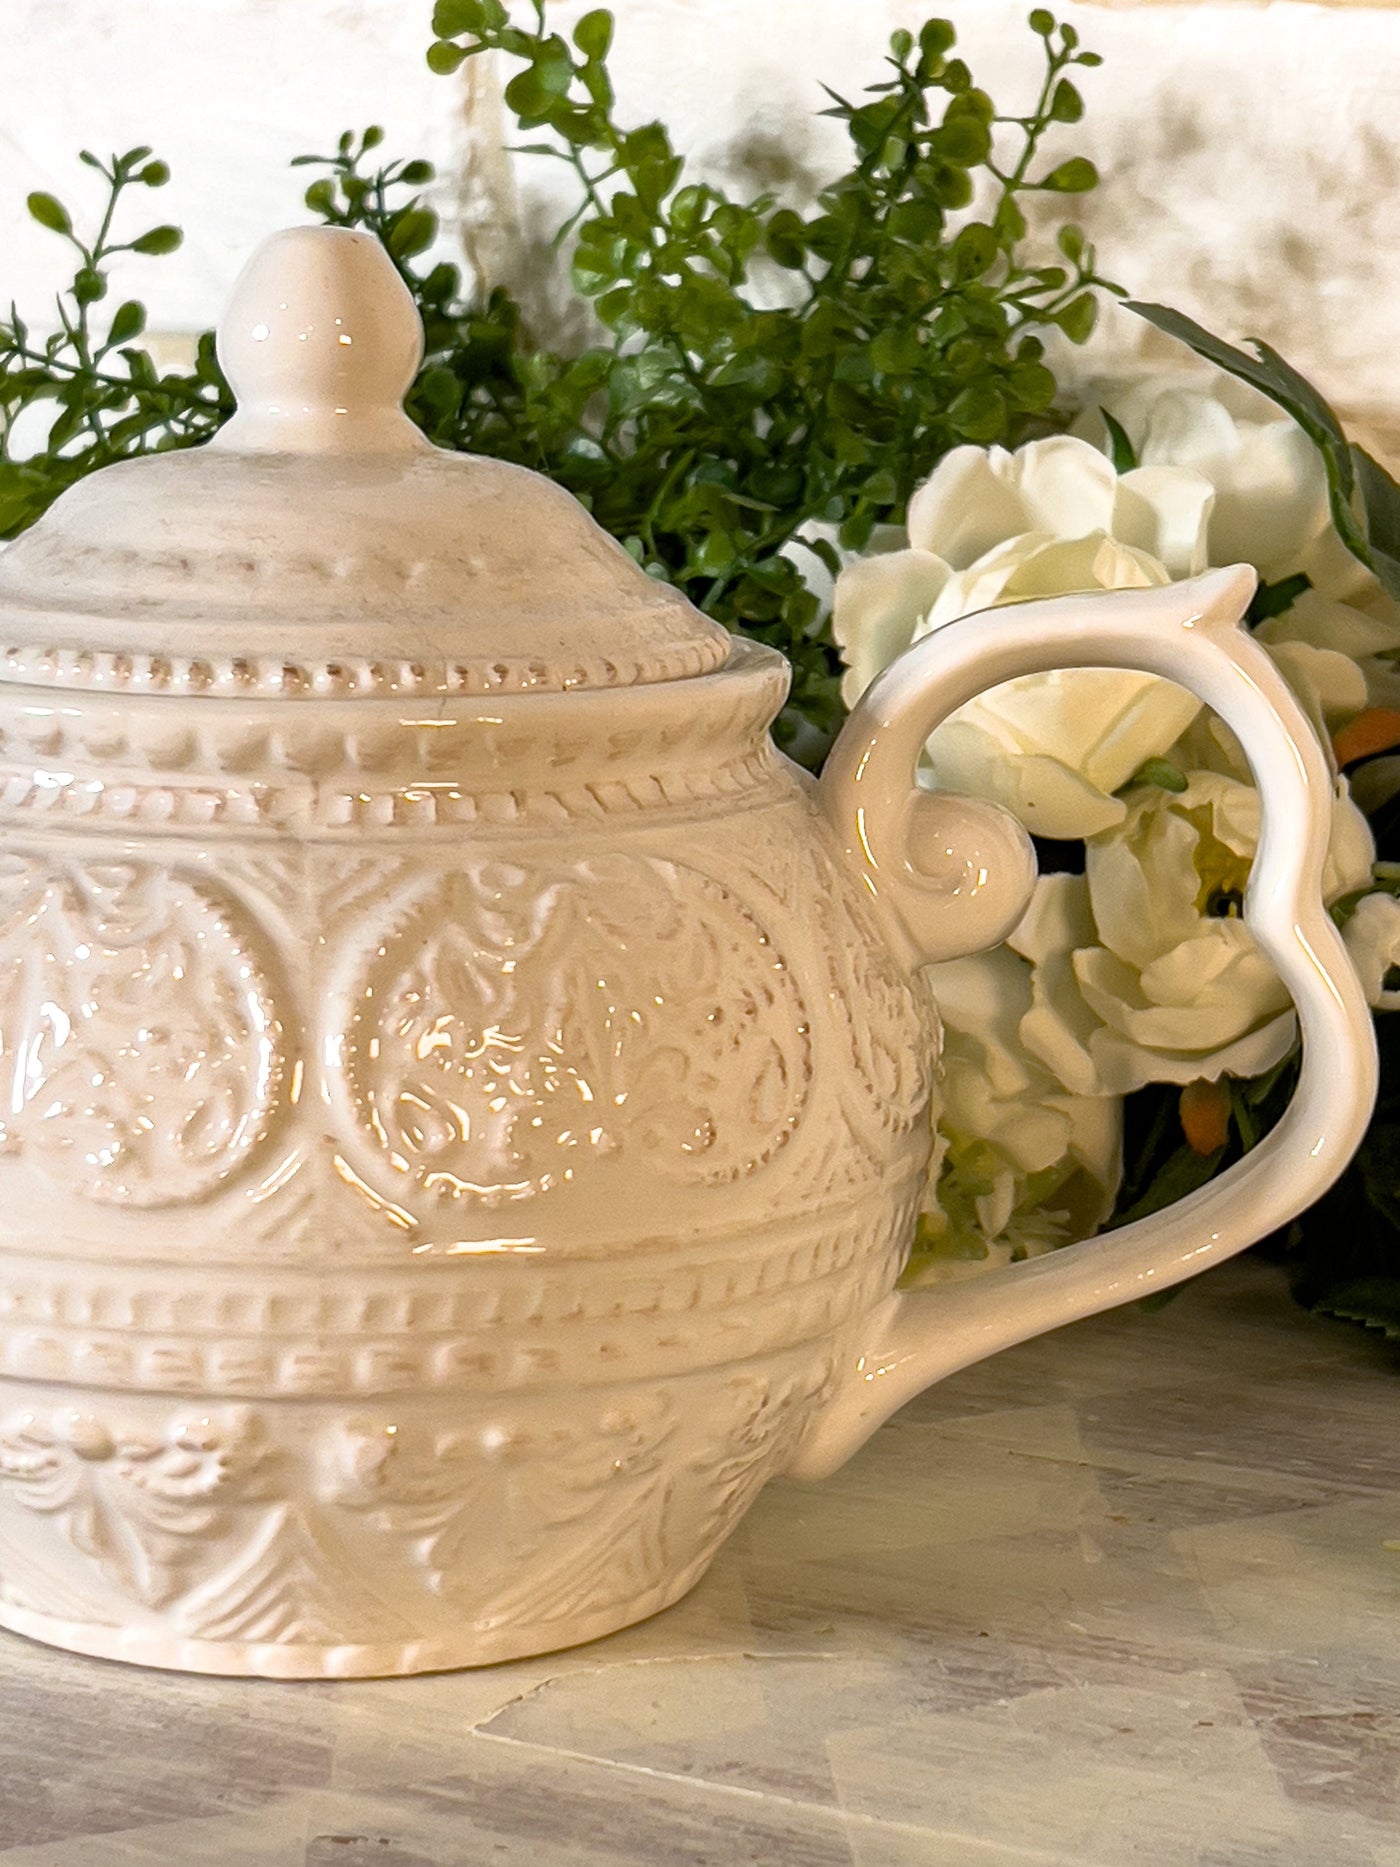 WHITE RAISED PATTERNED TEAPOT Revive In Style Vintage Furniture Painted Refinished Redesign Beautiful One of a Kind Artistic Antique Unique Home Decor Interior Design French Country Shabby Chic Cottage Farmhouse Grandmillenial Coastal Chalk Paint Metallic Glam Eclectic Quality Dovetailed Rustic Furniture Painter Pinterest Bedroom Living Room Entryway Kitchen Home Trends House Styles Decorating ideas